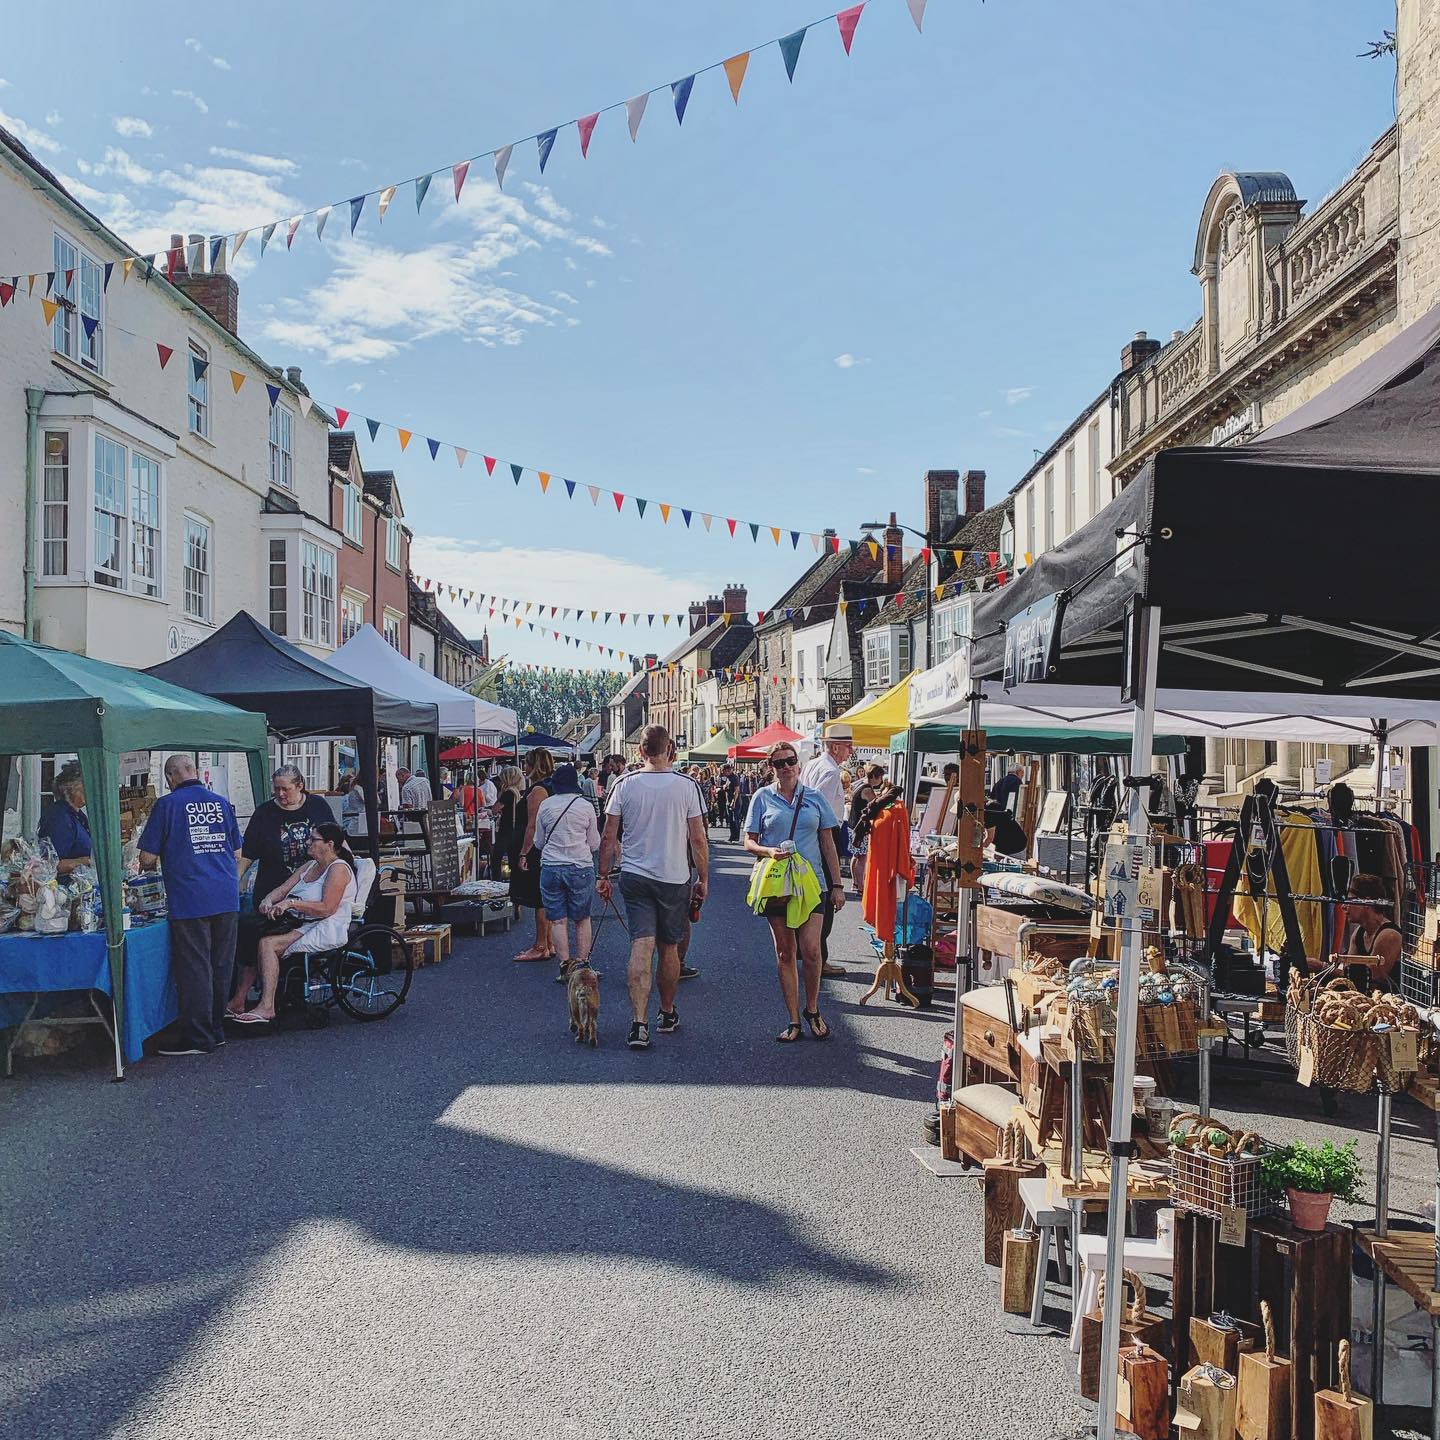 We are really excited to be back in Malmesbury on Sunday for the Petticoat Lane market as part of the @malmesburycarnival It’s a fab place to spend a few hours with lots of stalls, local cafes and pubs, music and hopefully sunshine🤞